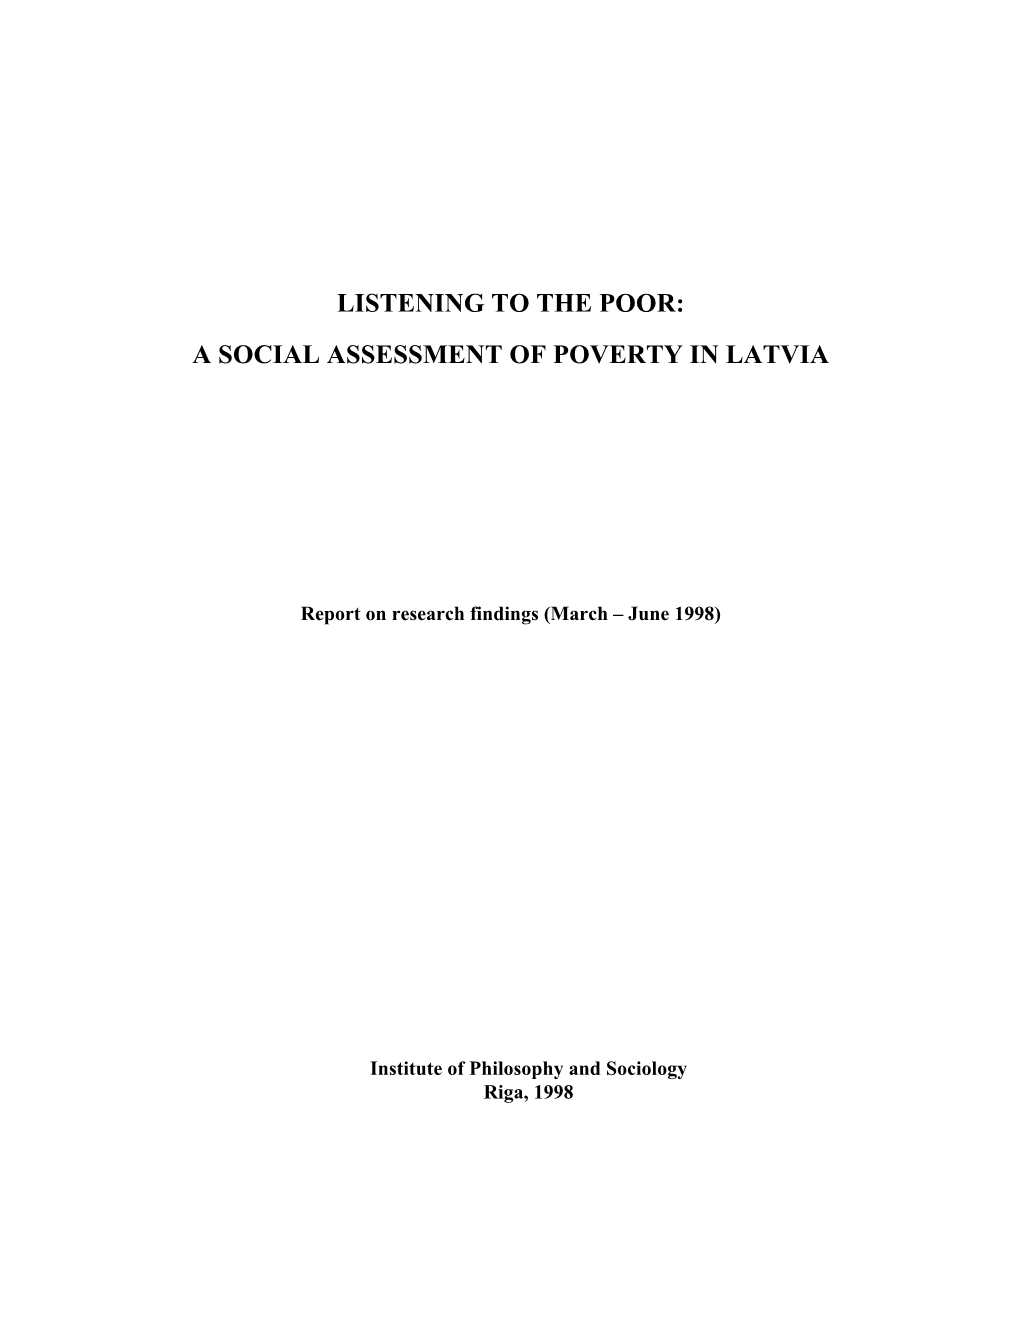 A Social Assessment of Poverty in Latvia